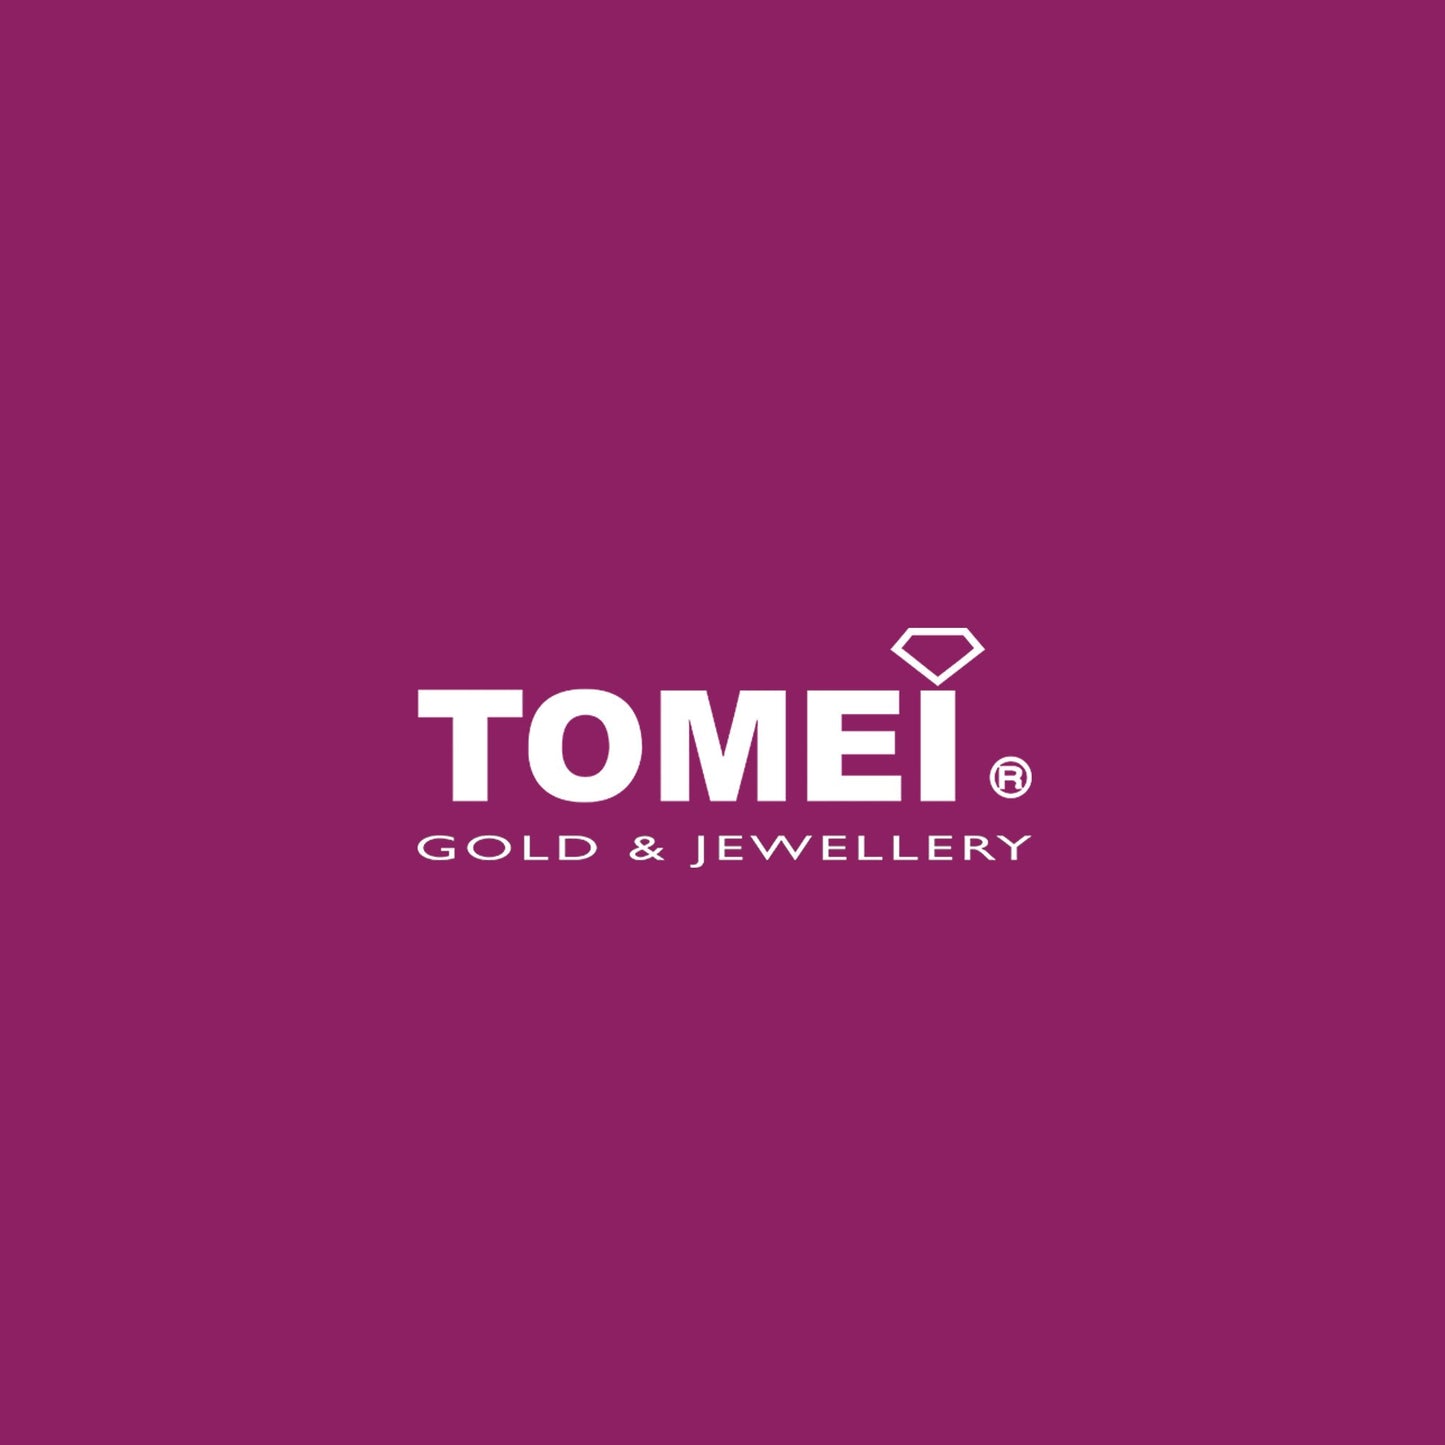 TOMEI Rouge Collection, Fall in Love Earrings, Rose Gold 750 (WQ4-DS)